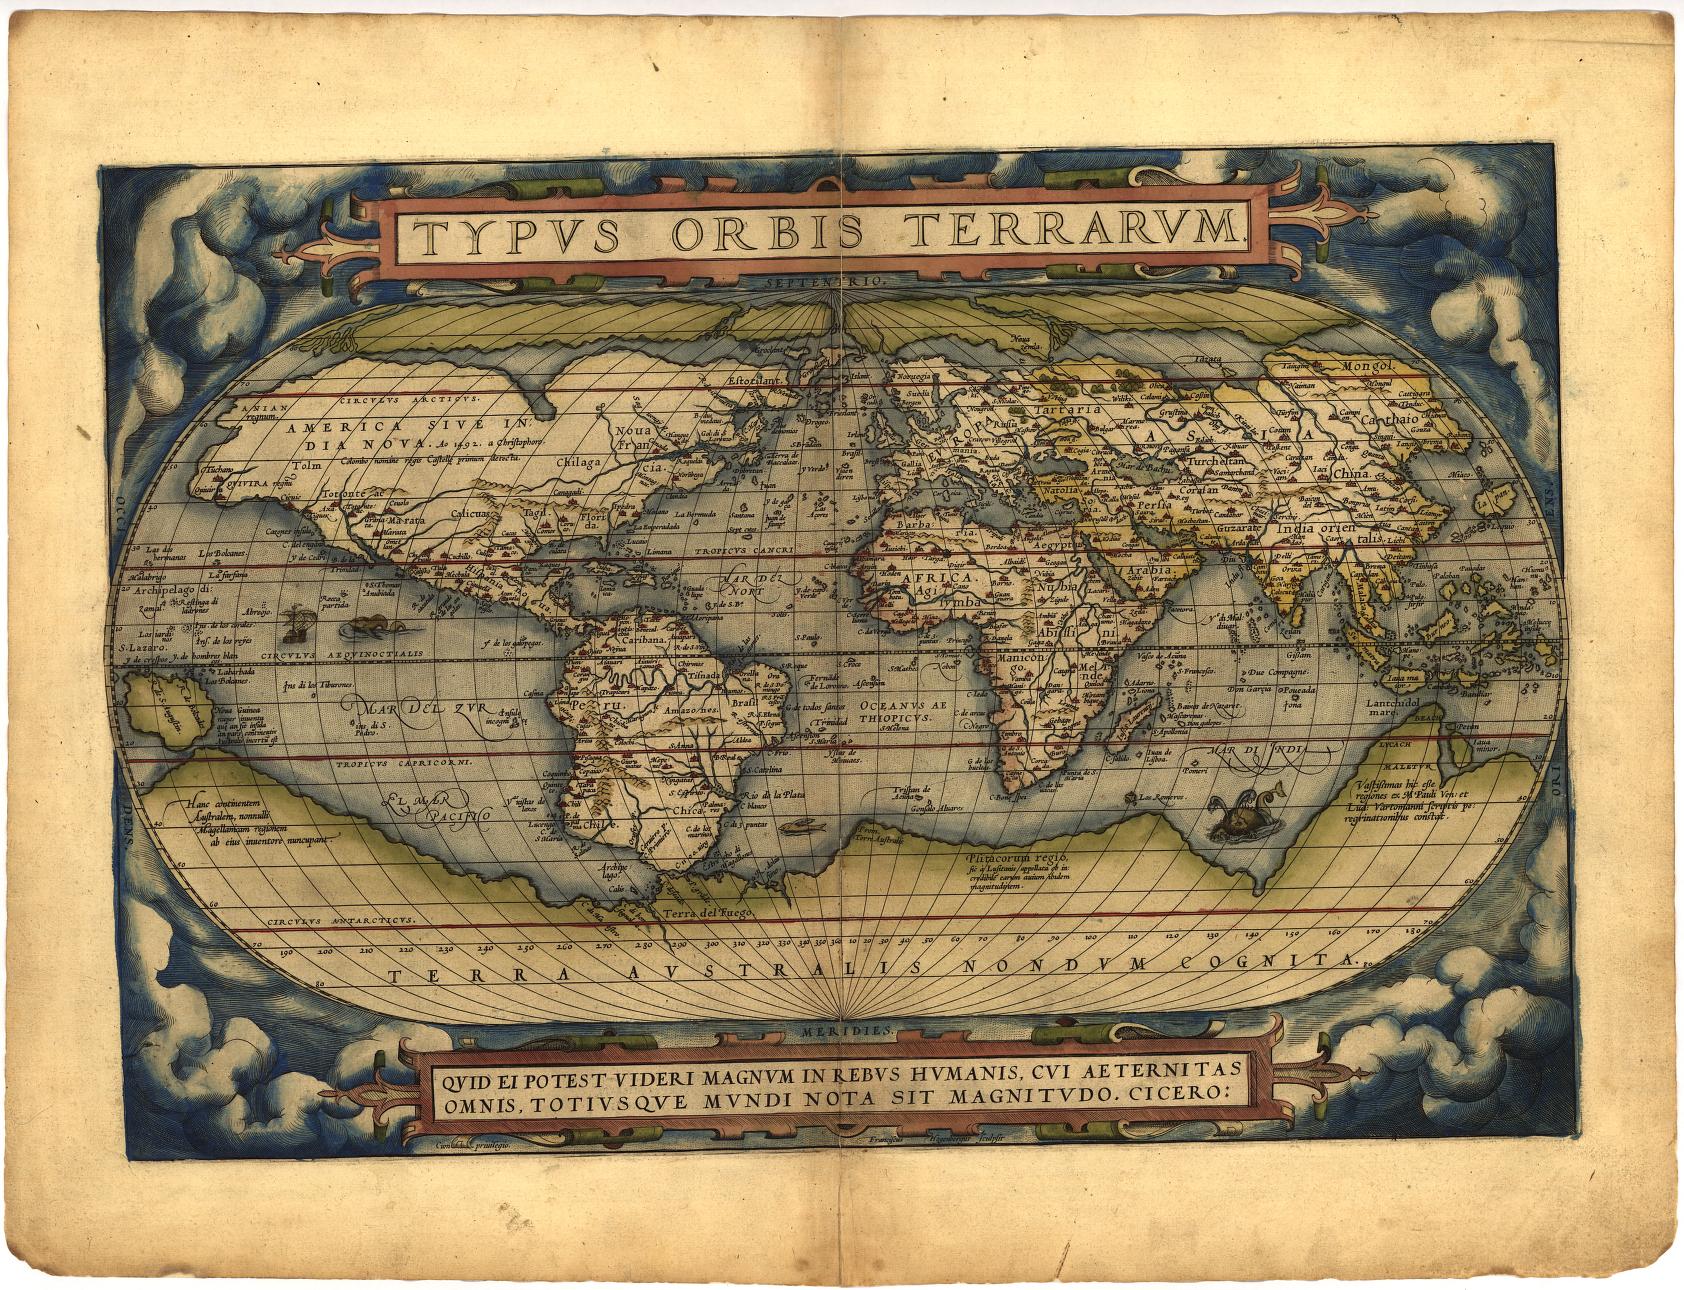 Printed color world map on folio atlas plate, with large landmasses at both poles